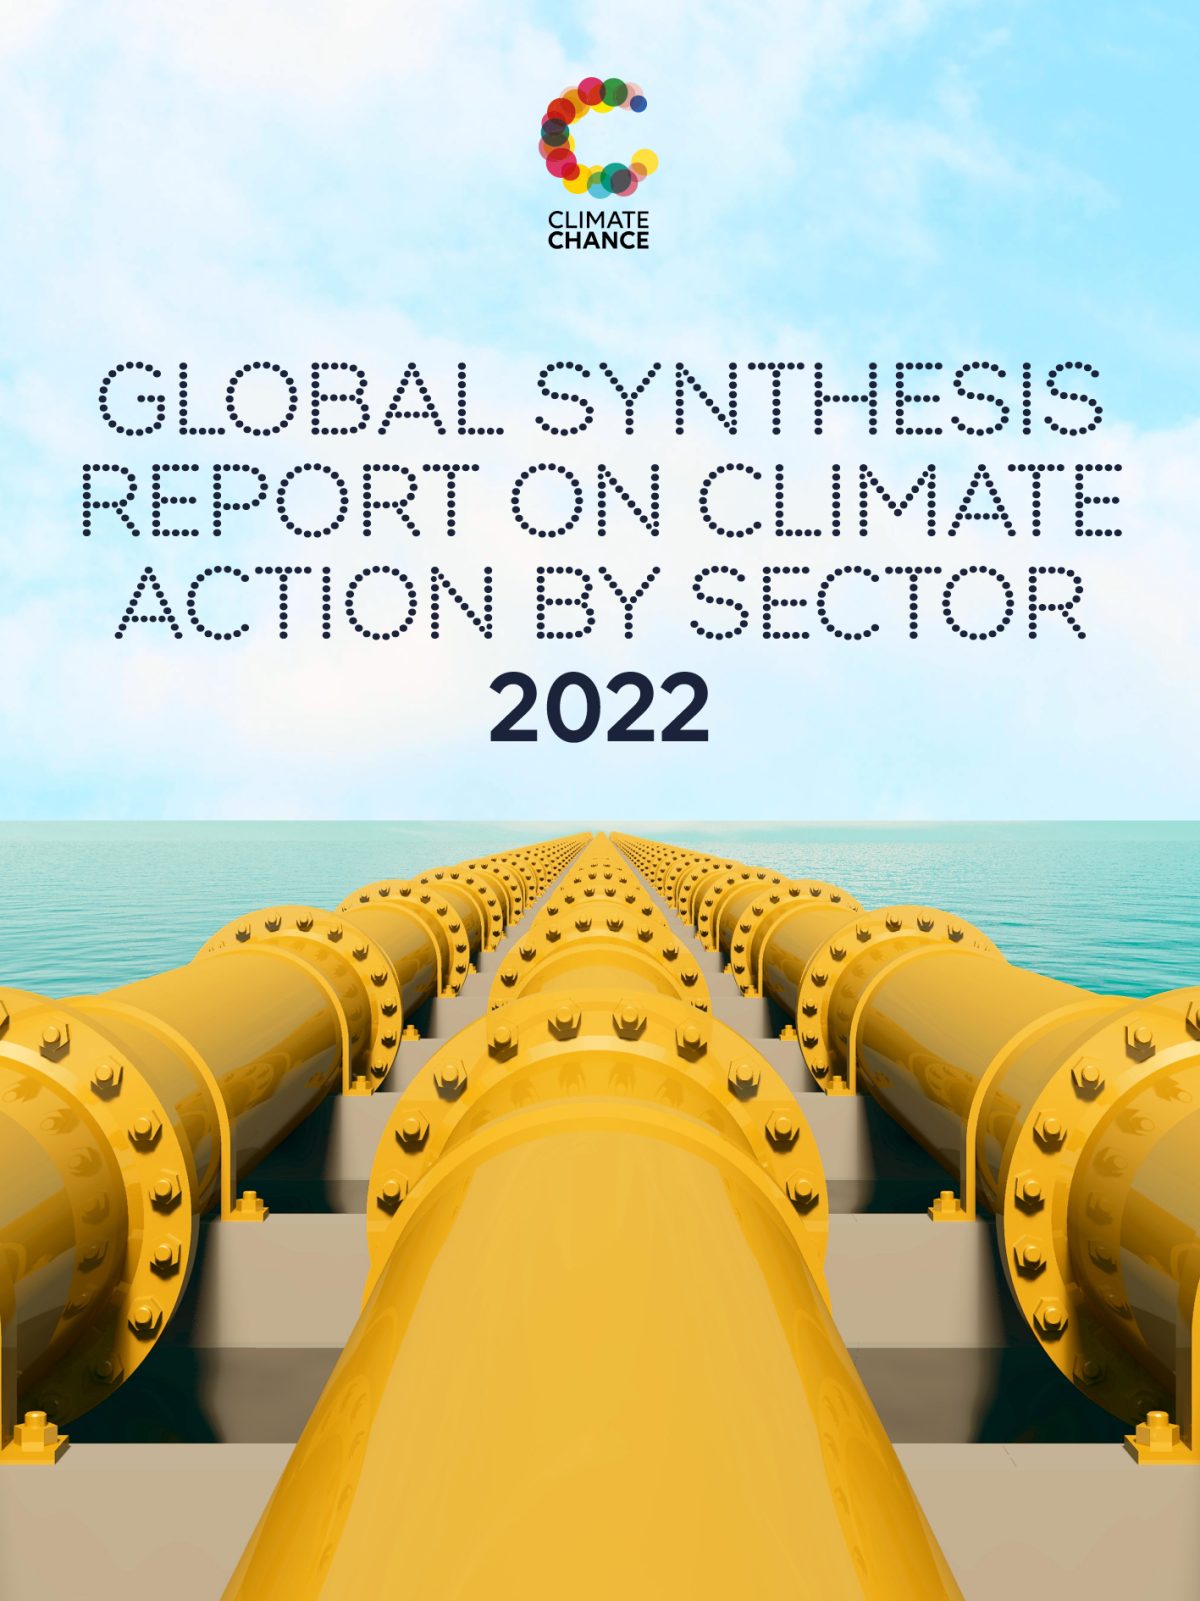 Global Synthesis Report on Climate Action by Sector 2022